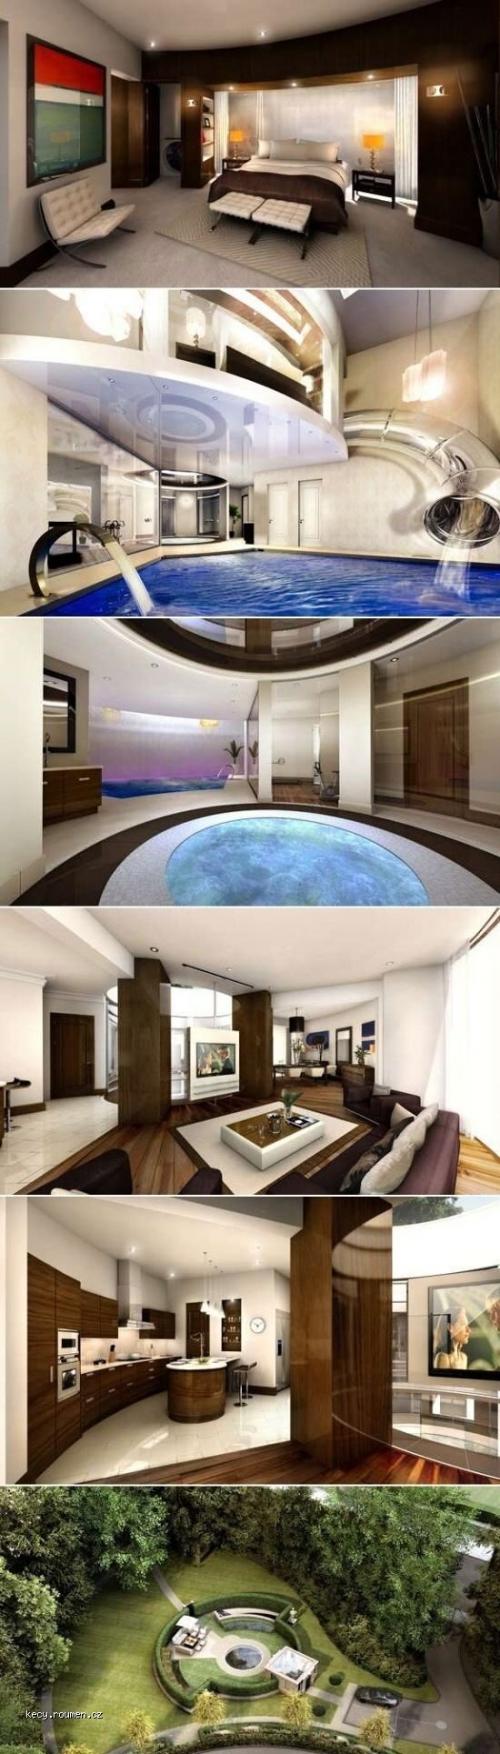  Slide from bedroom to pool  subterranean mansion 